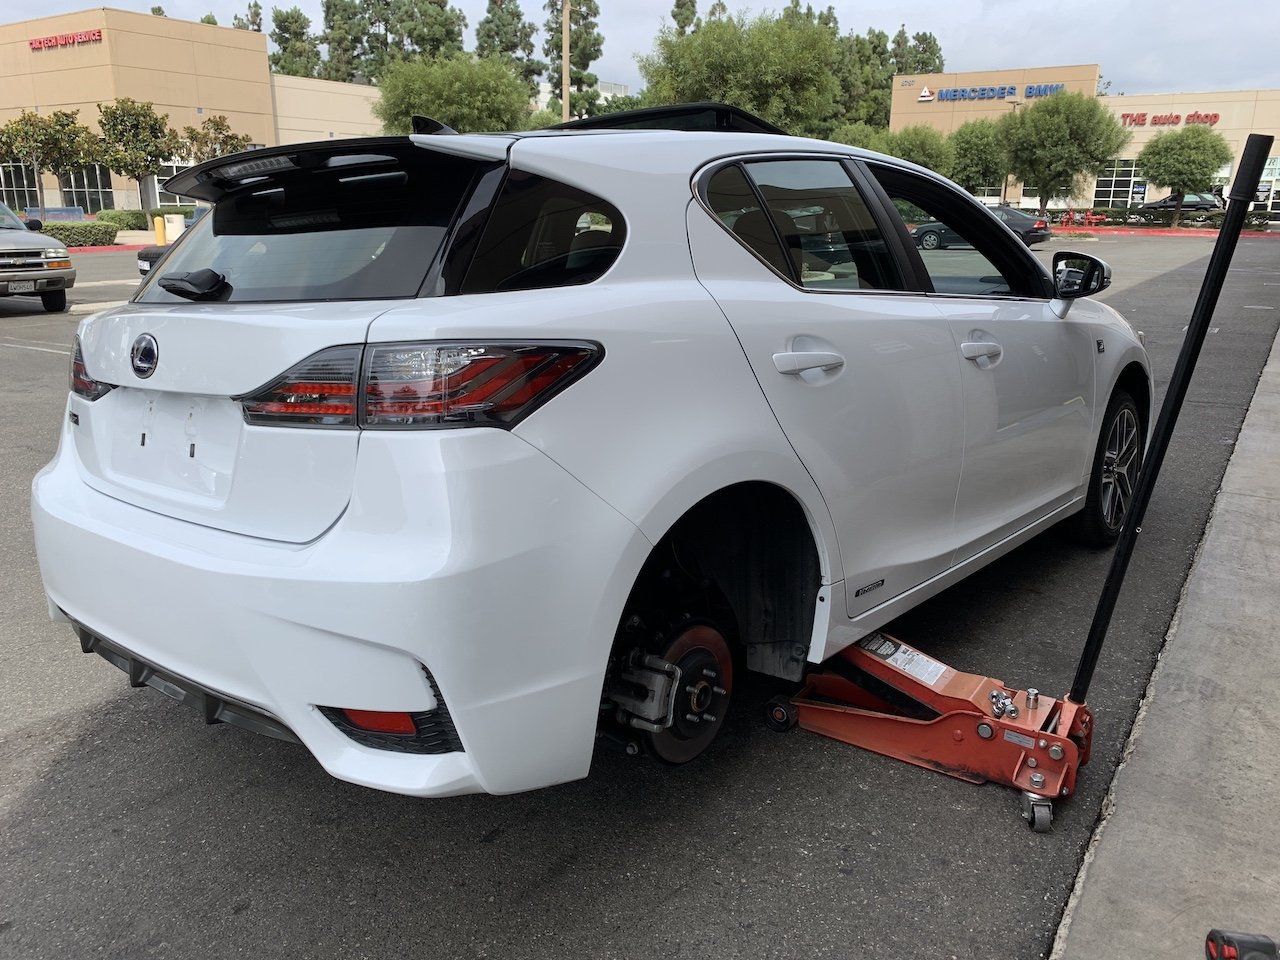 Installed Lexus CT200h 17 wheels and 205/50/17 tires